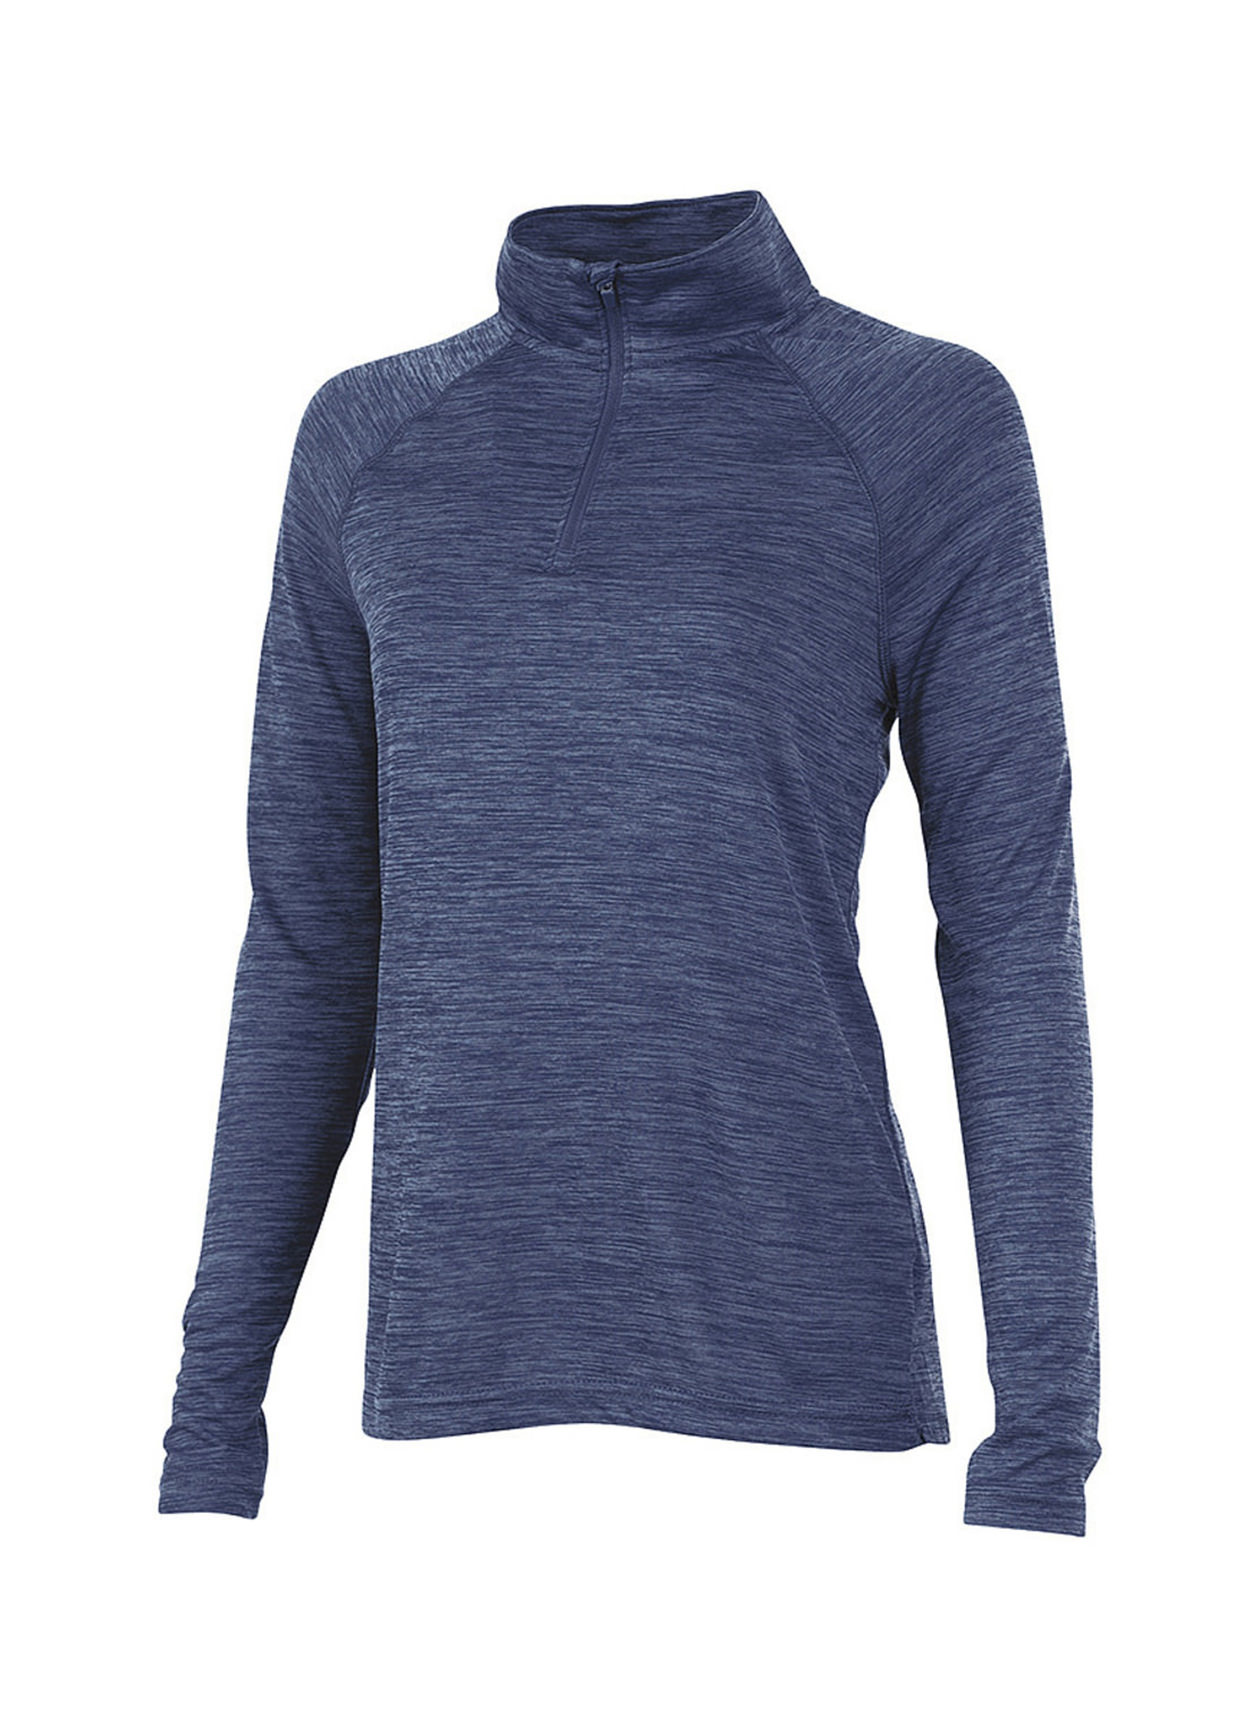 Charles River Women's Navy Space Dyed Quarter-Zip